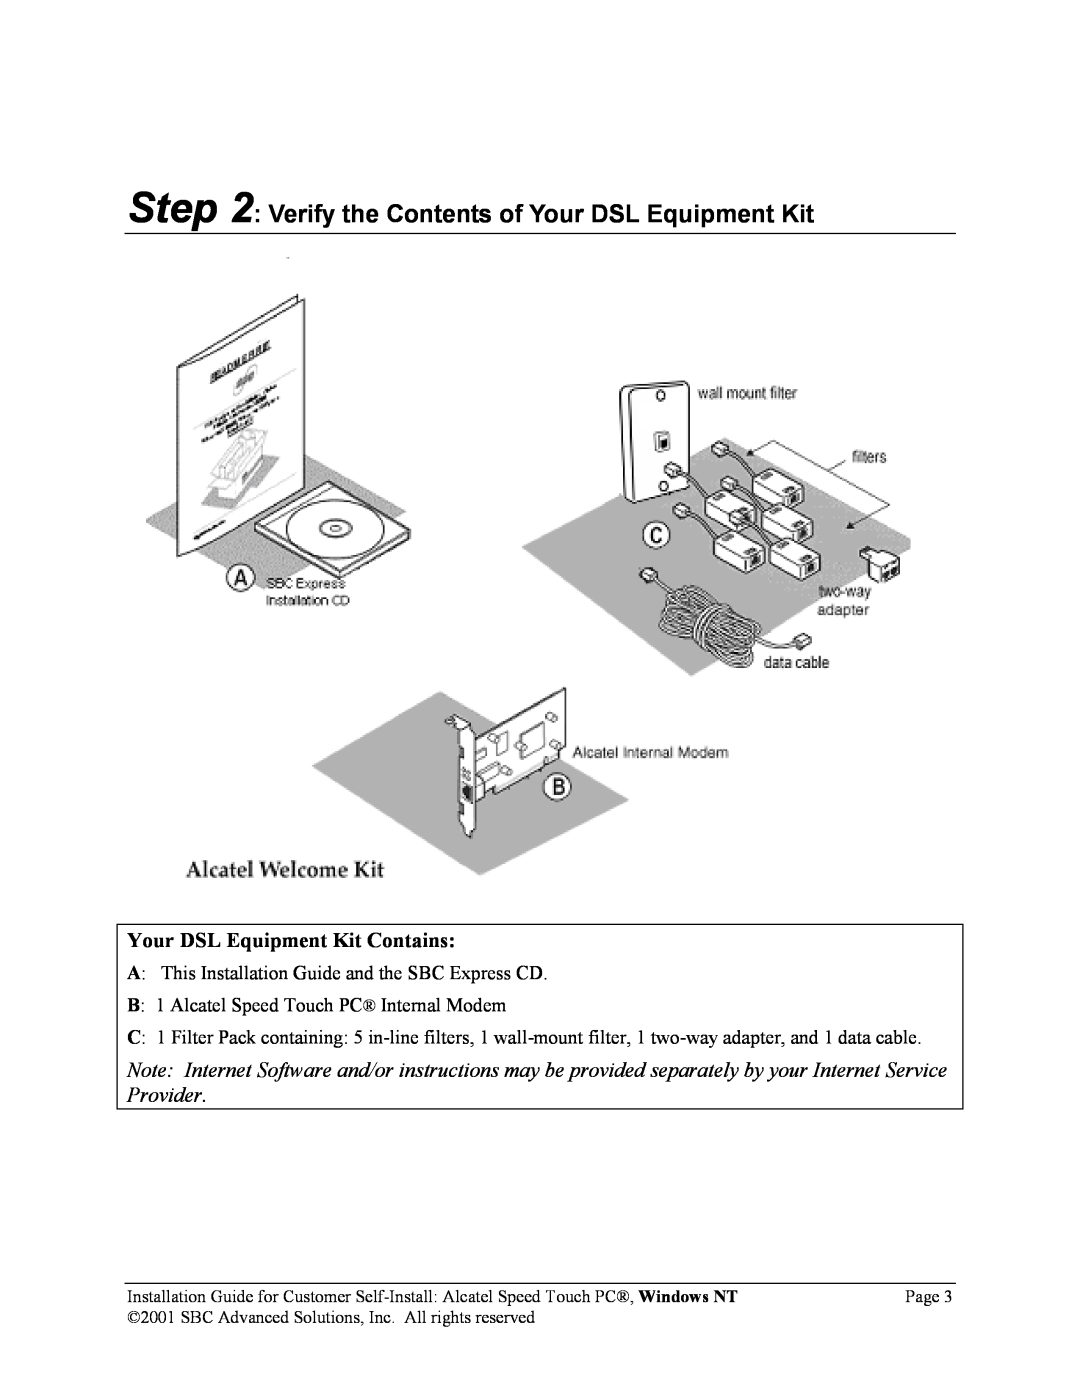 SBC comm AlcatelPCNT02A Verify the Contents of Your DSL Equipment Kit, A This Installation Guide and the SBC Express CD 